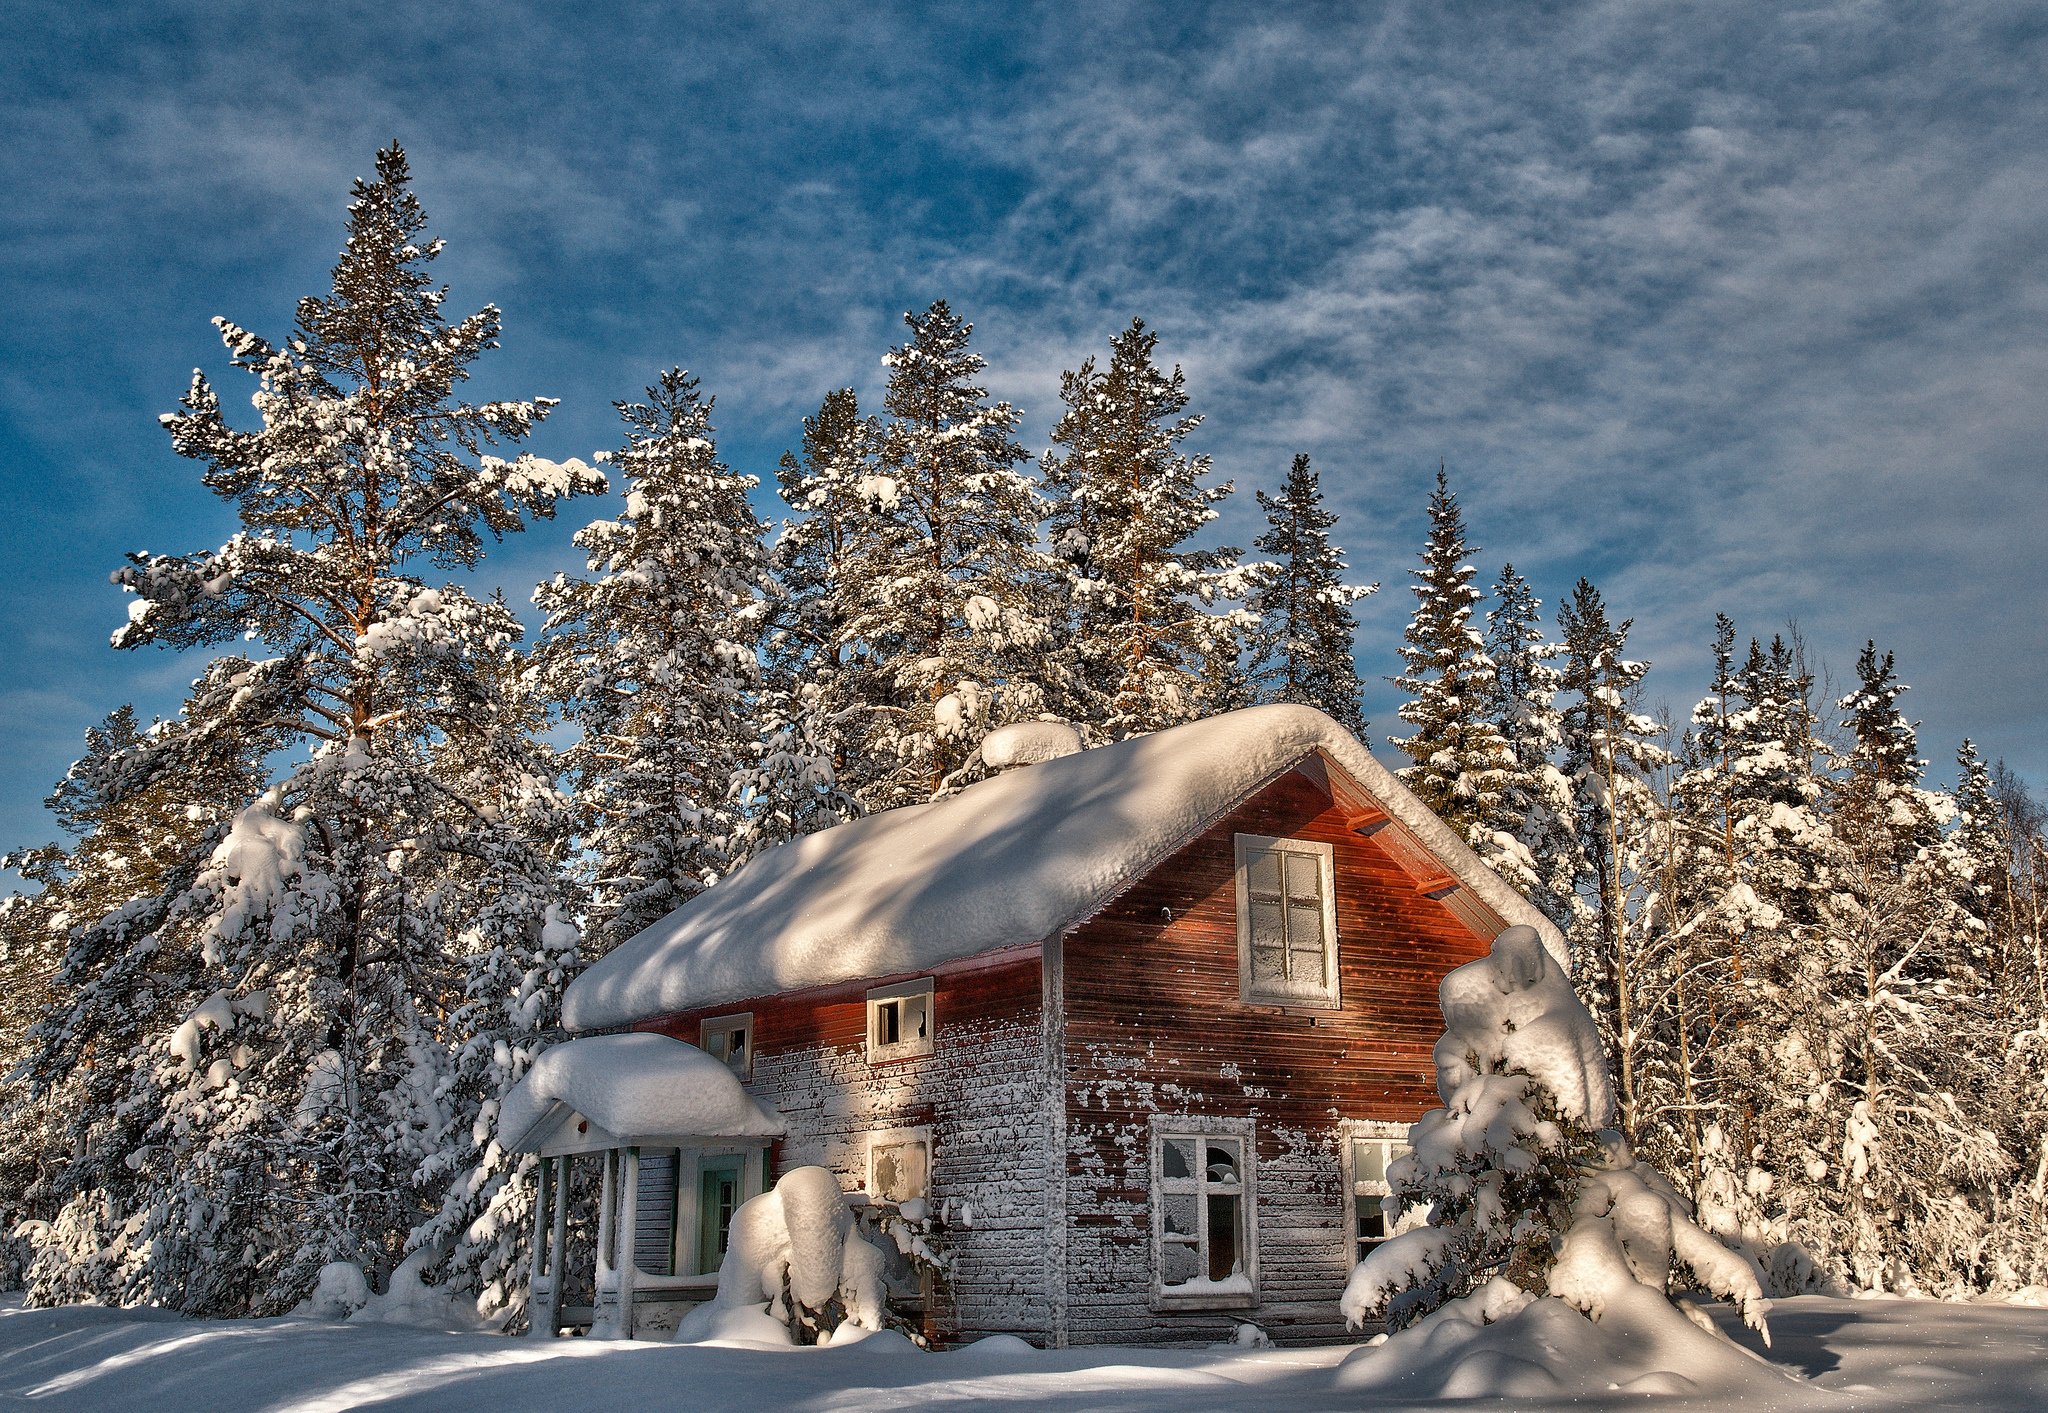 Wallpaper Full HD photography, winter, earth, house, man made, pine, snow, tree